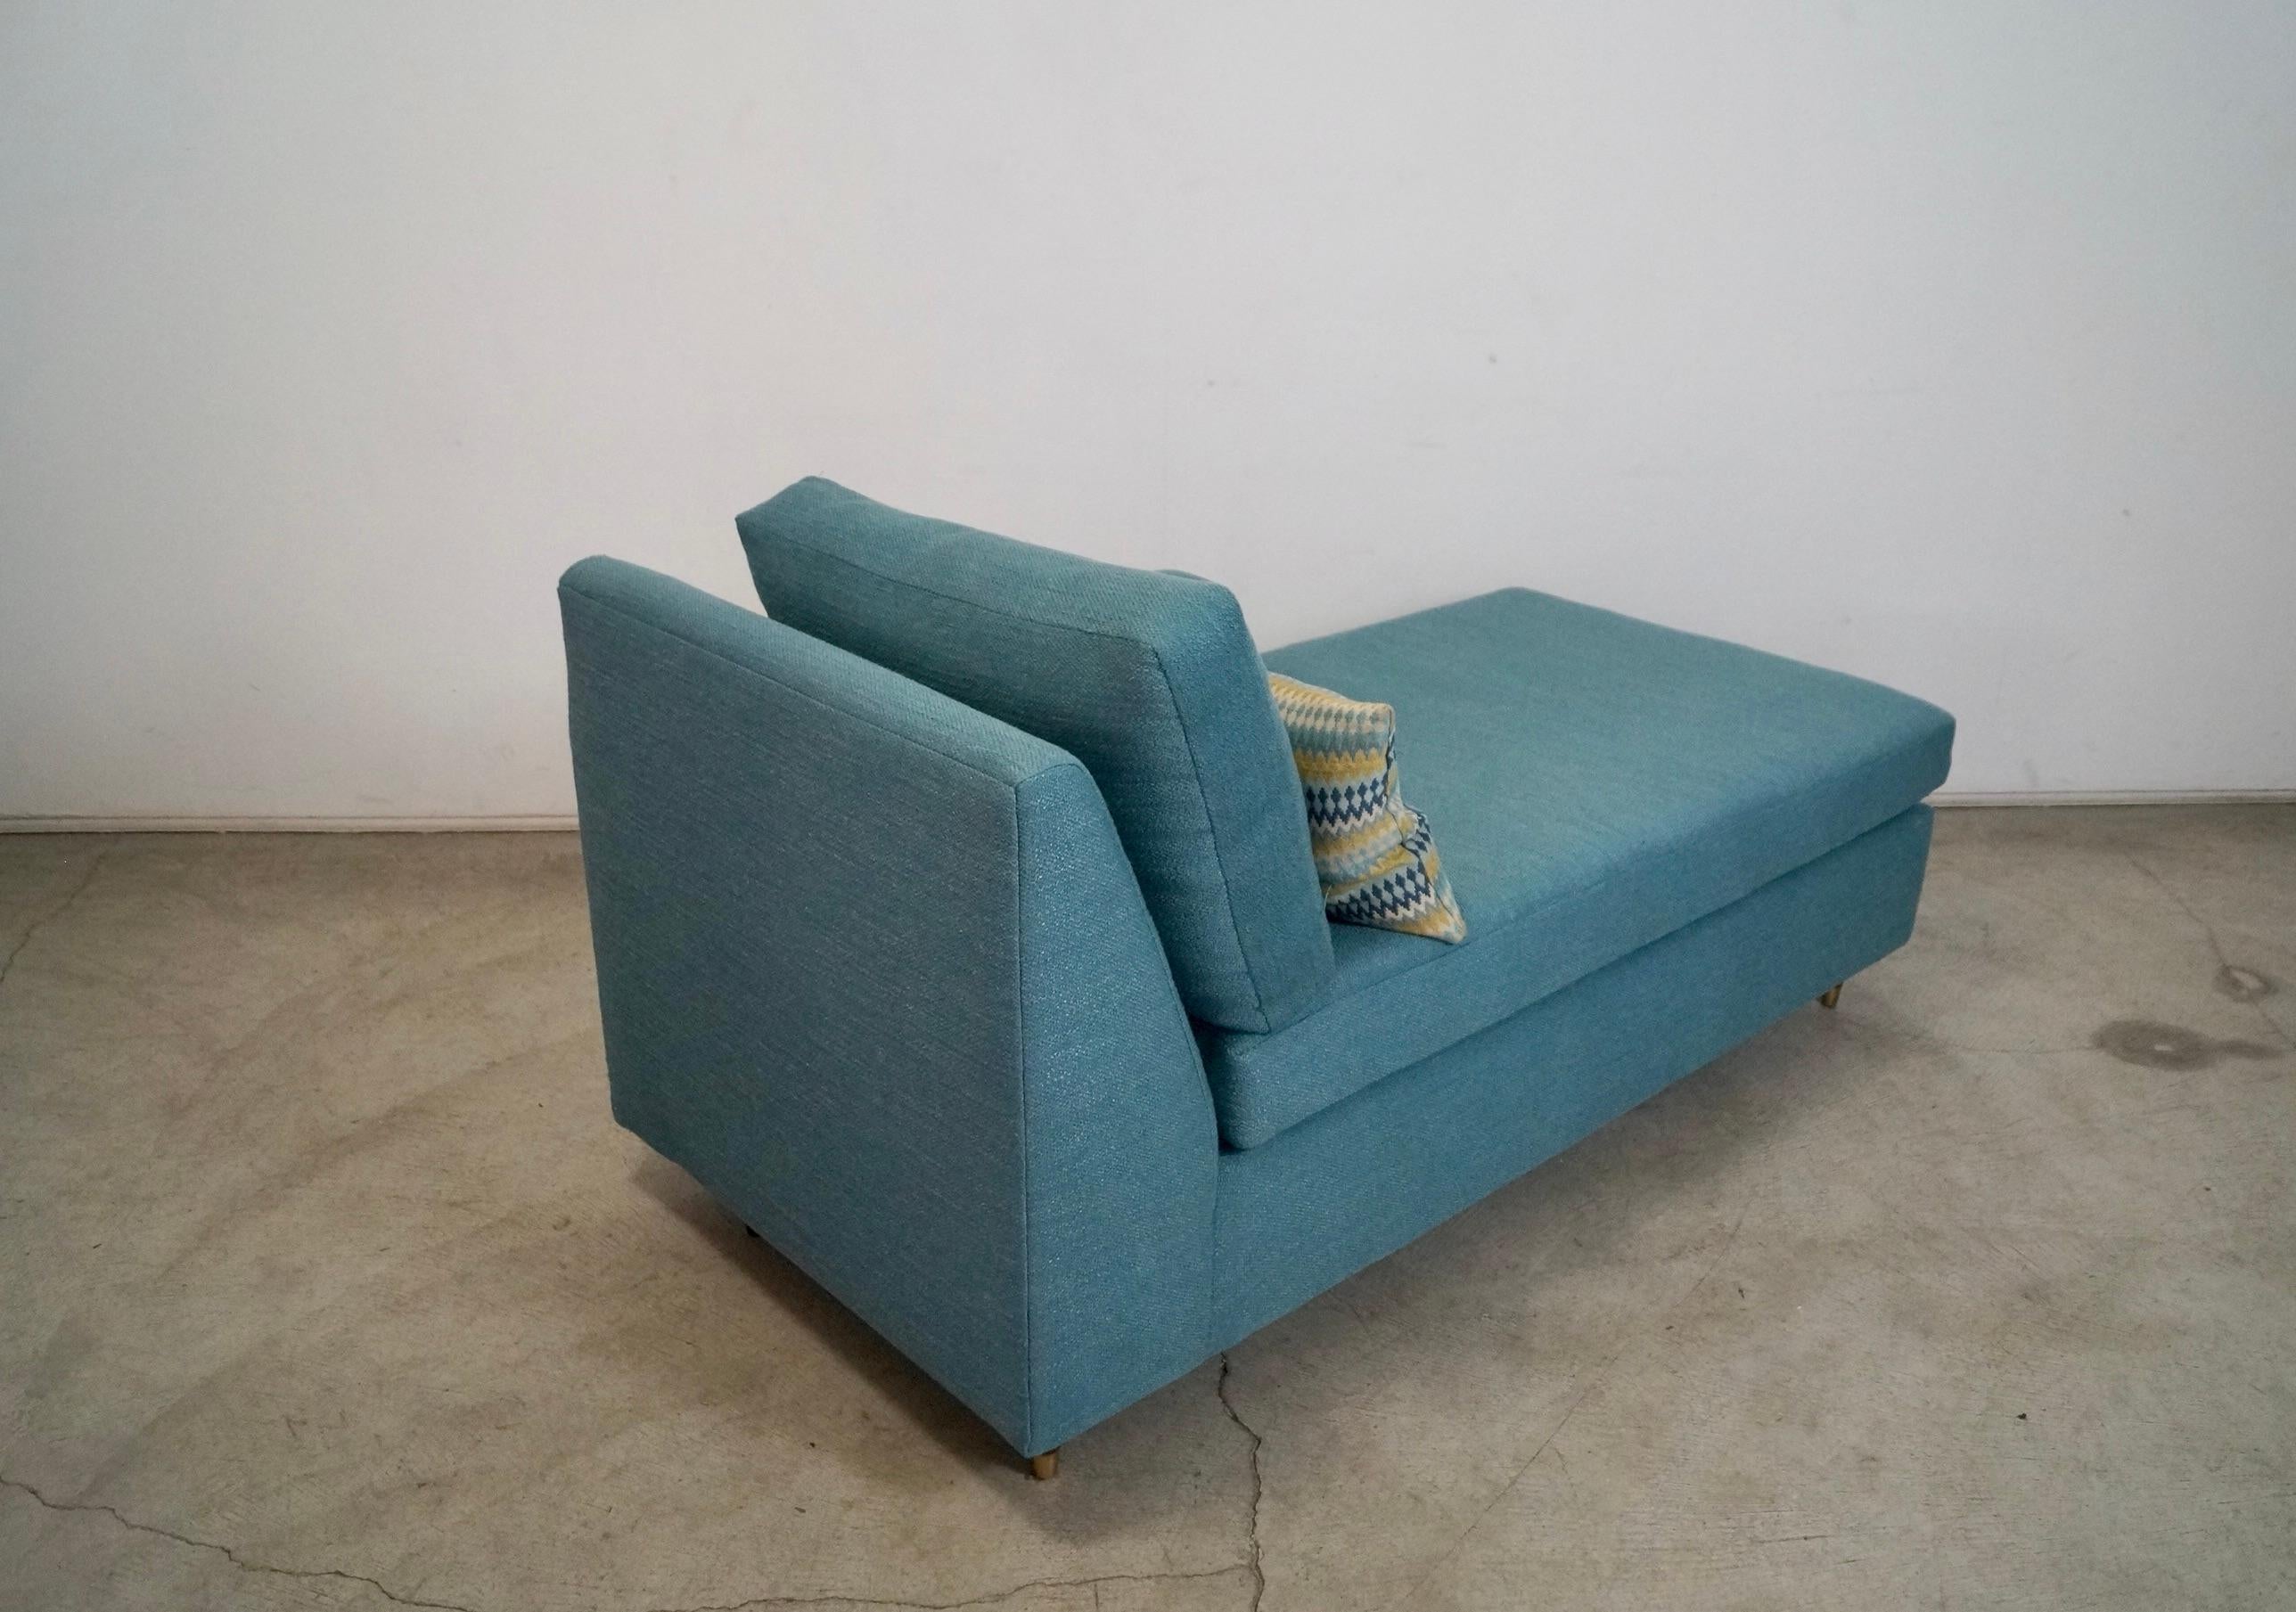 1970's Mid-Century Modern Single Arm Reupholstered Chaise Lounge Daybed For Sale 8